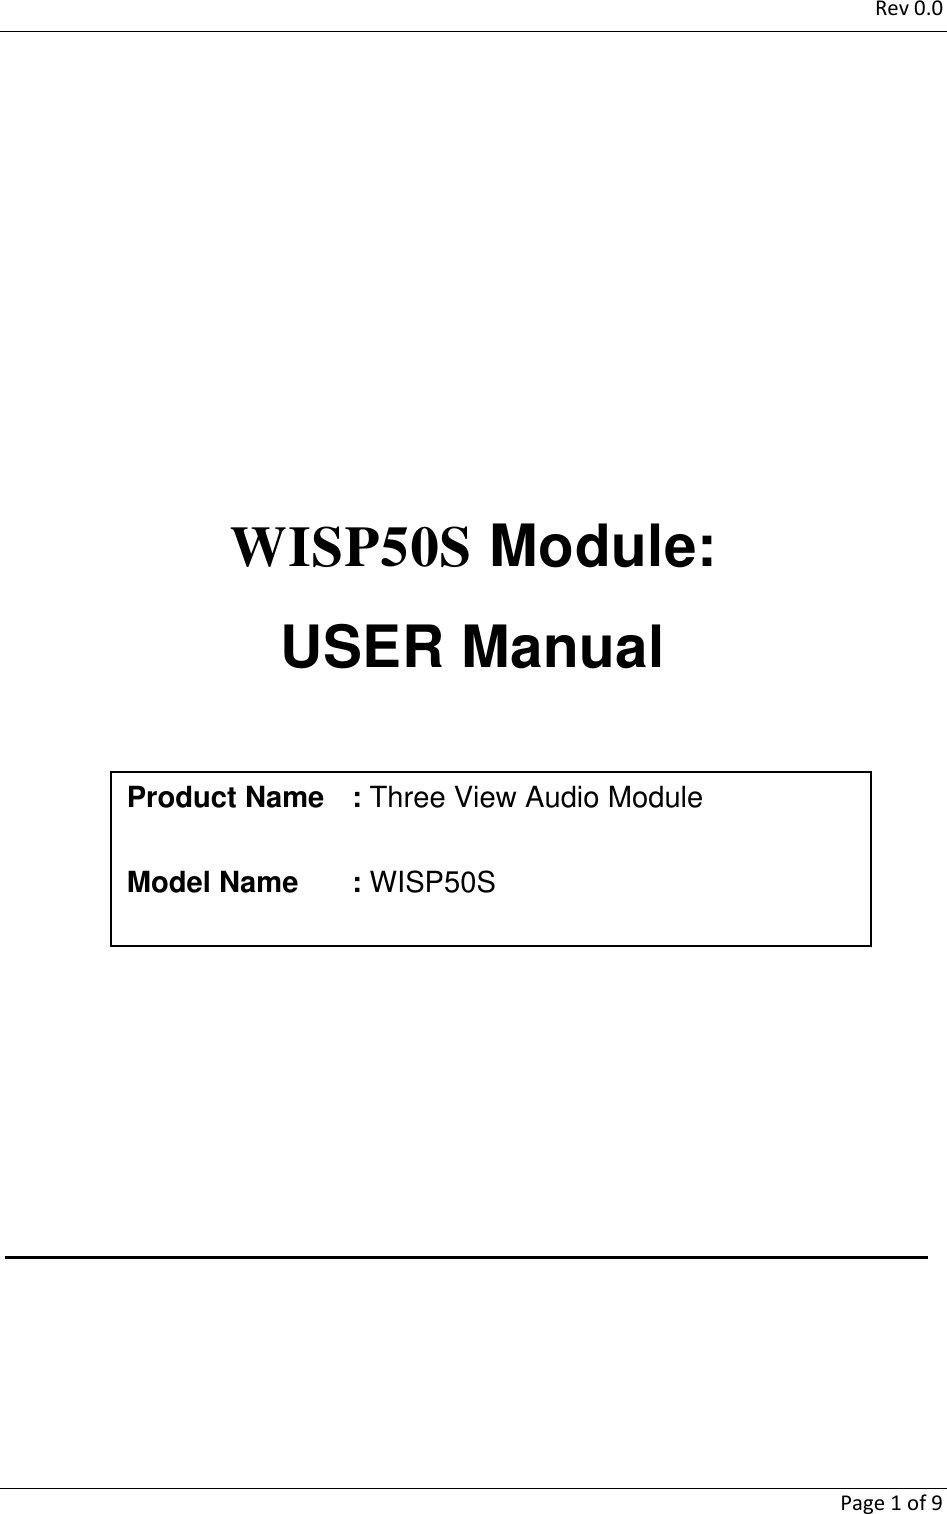 Rev0.0   Page1of9        WISP50S Module: USER Manual              Product Name  : Three View Audio Module  Model Name  : WISP50S 